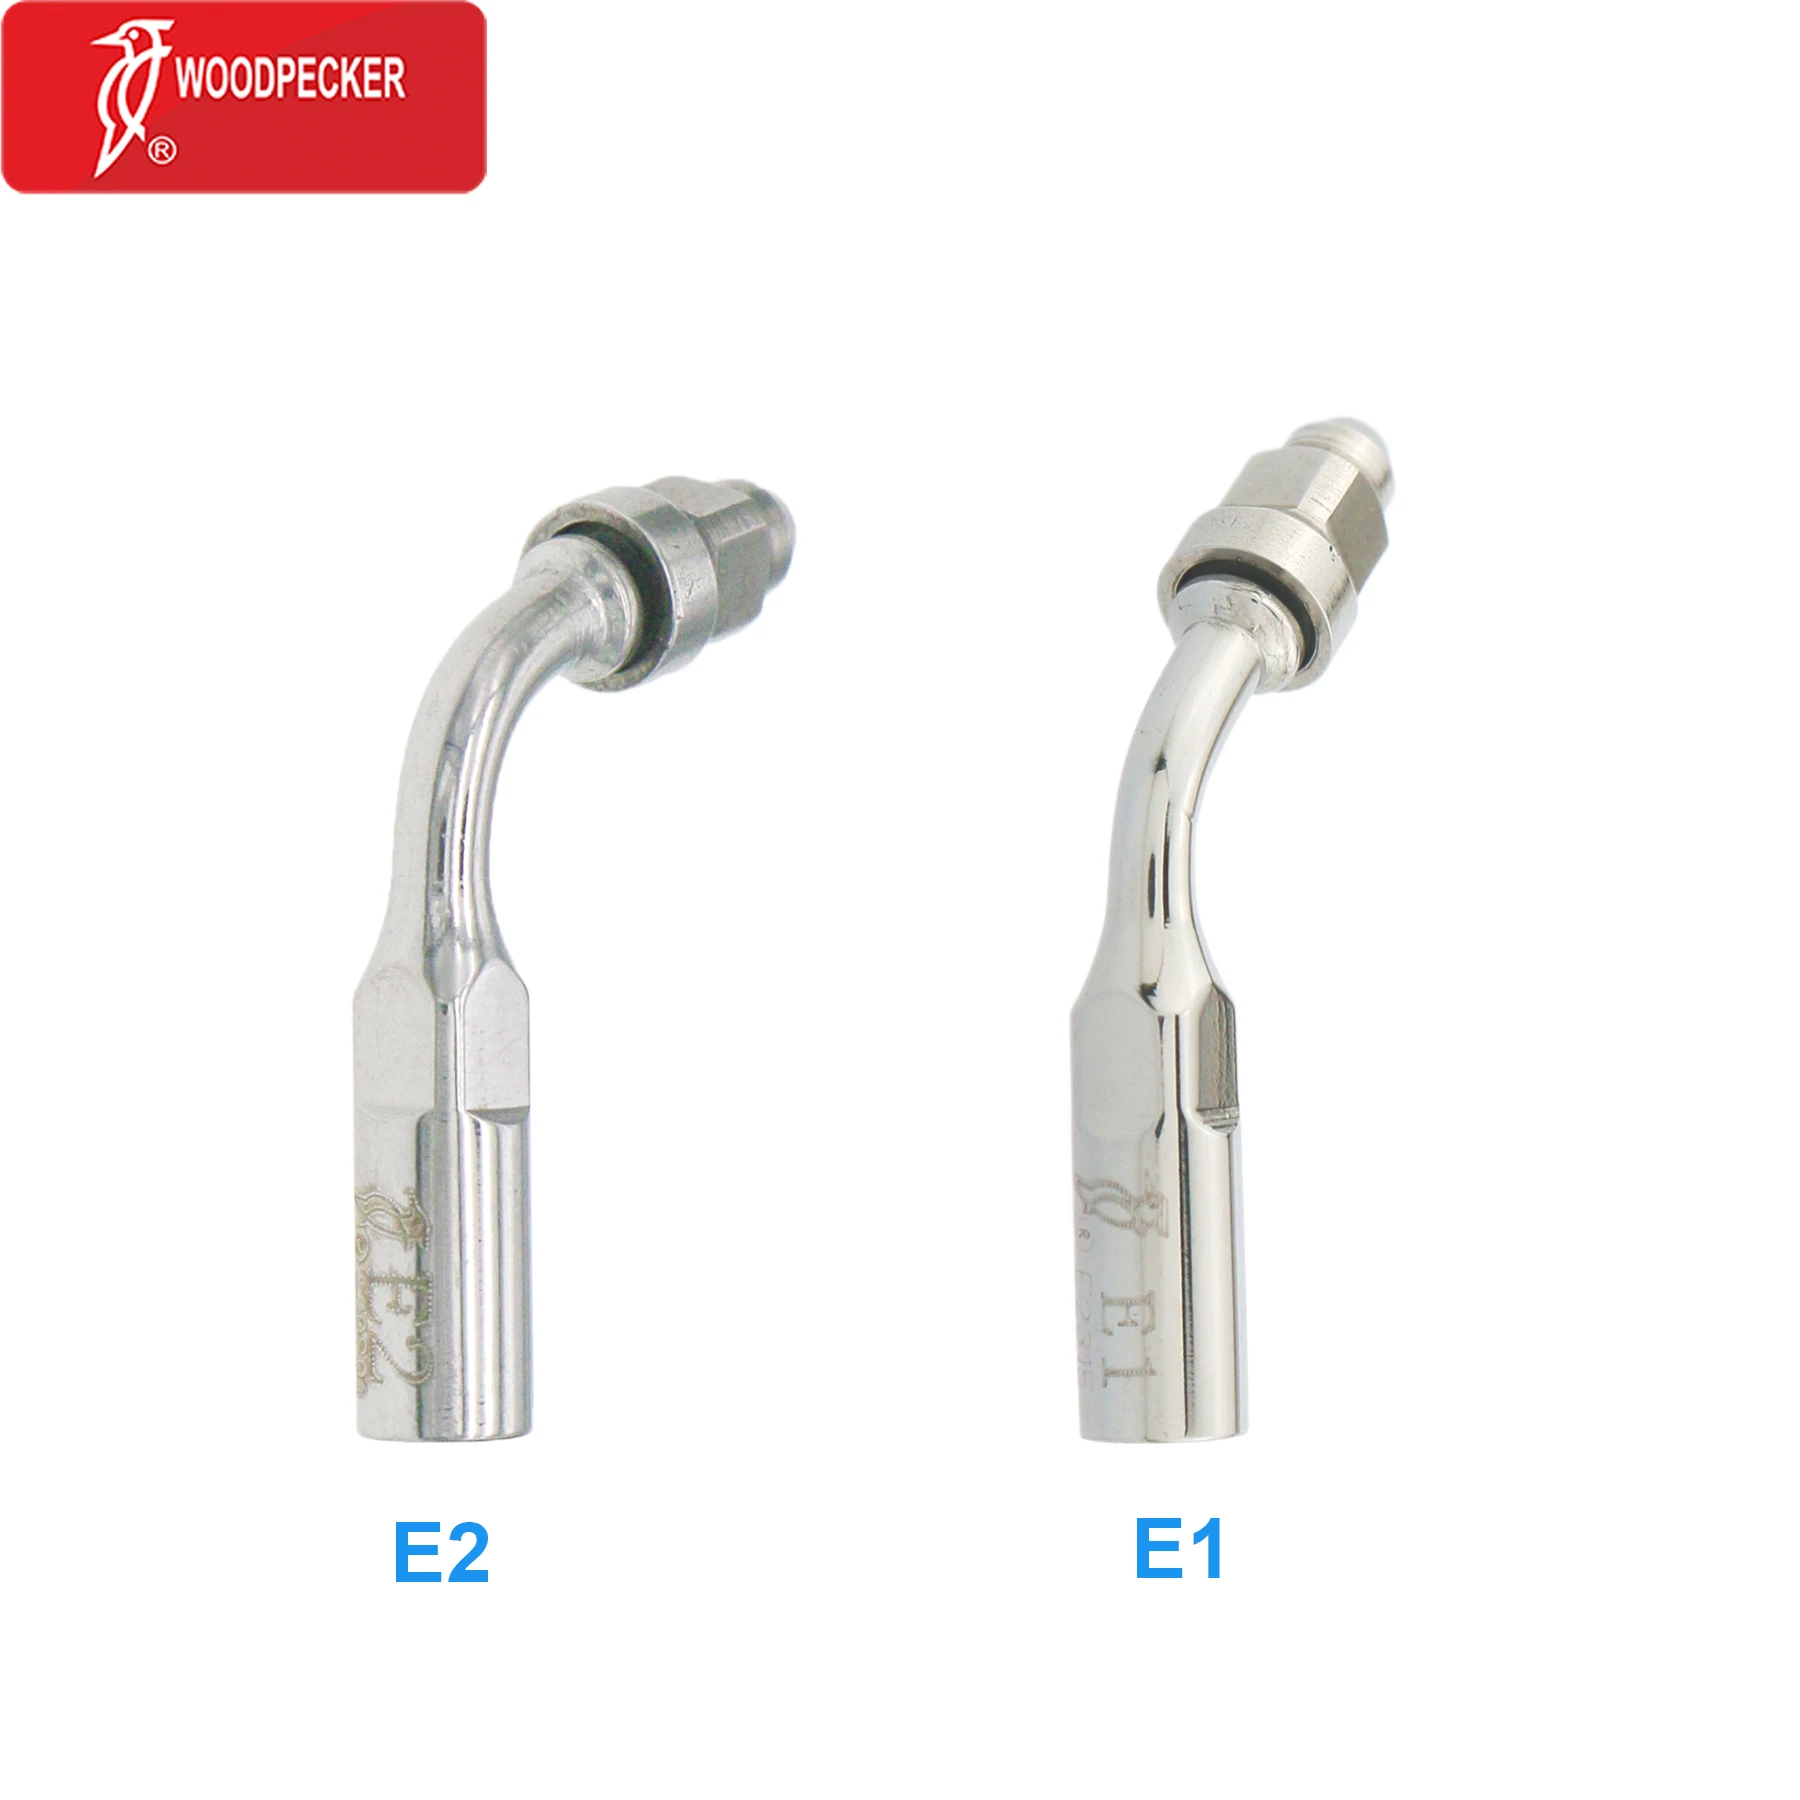 

5Pcs Woodpecker Dental Root Canal Cleaning Irrigating Tip E1 E2 Ultrasonic Scaler Endodontics Preparation Fit UDS EMS